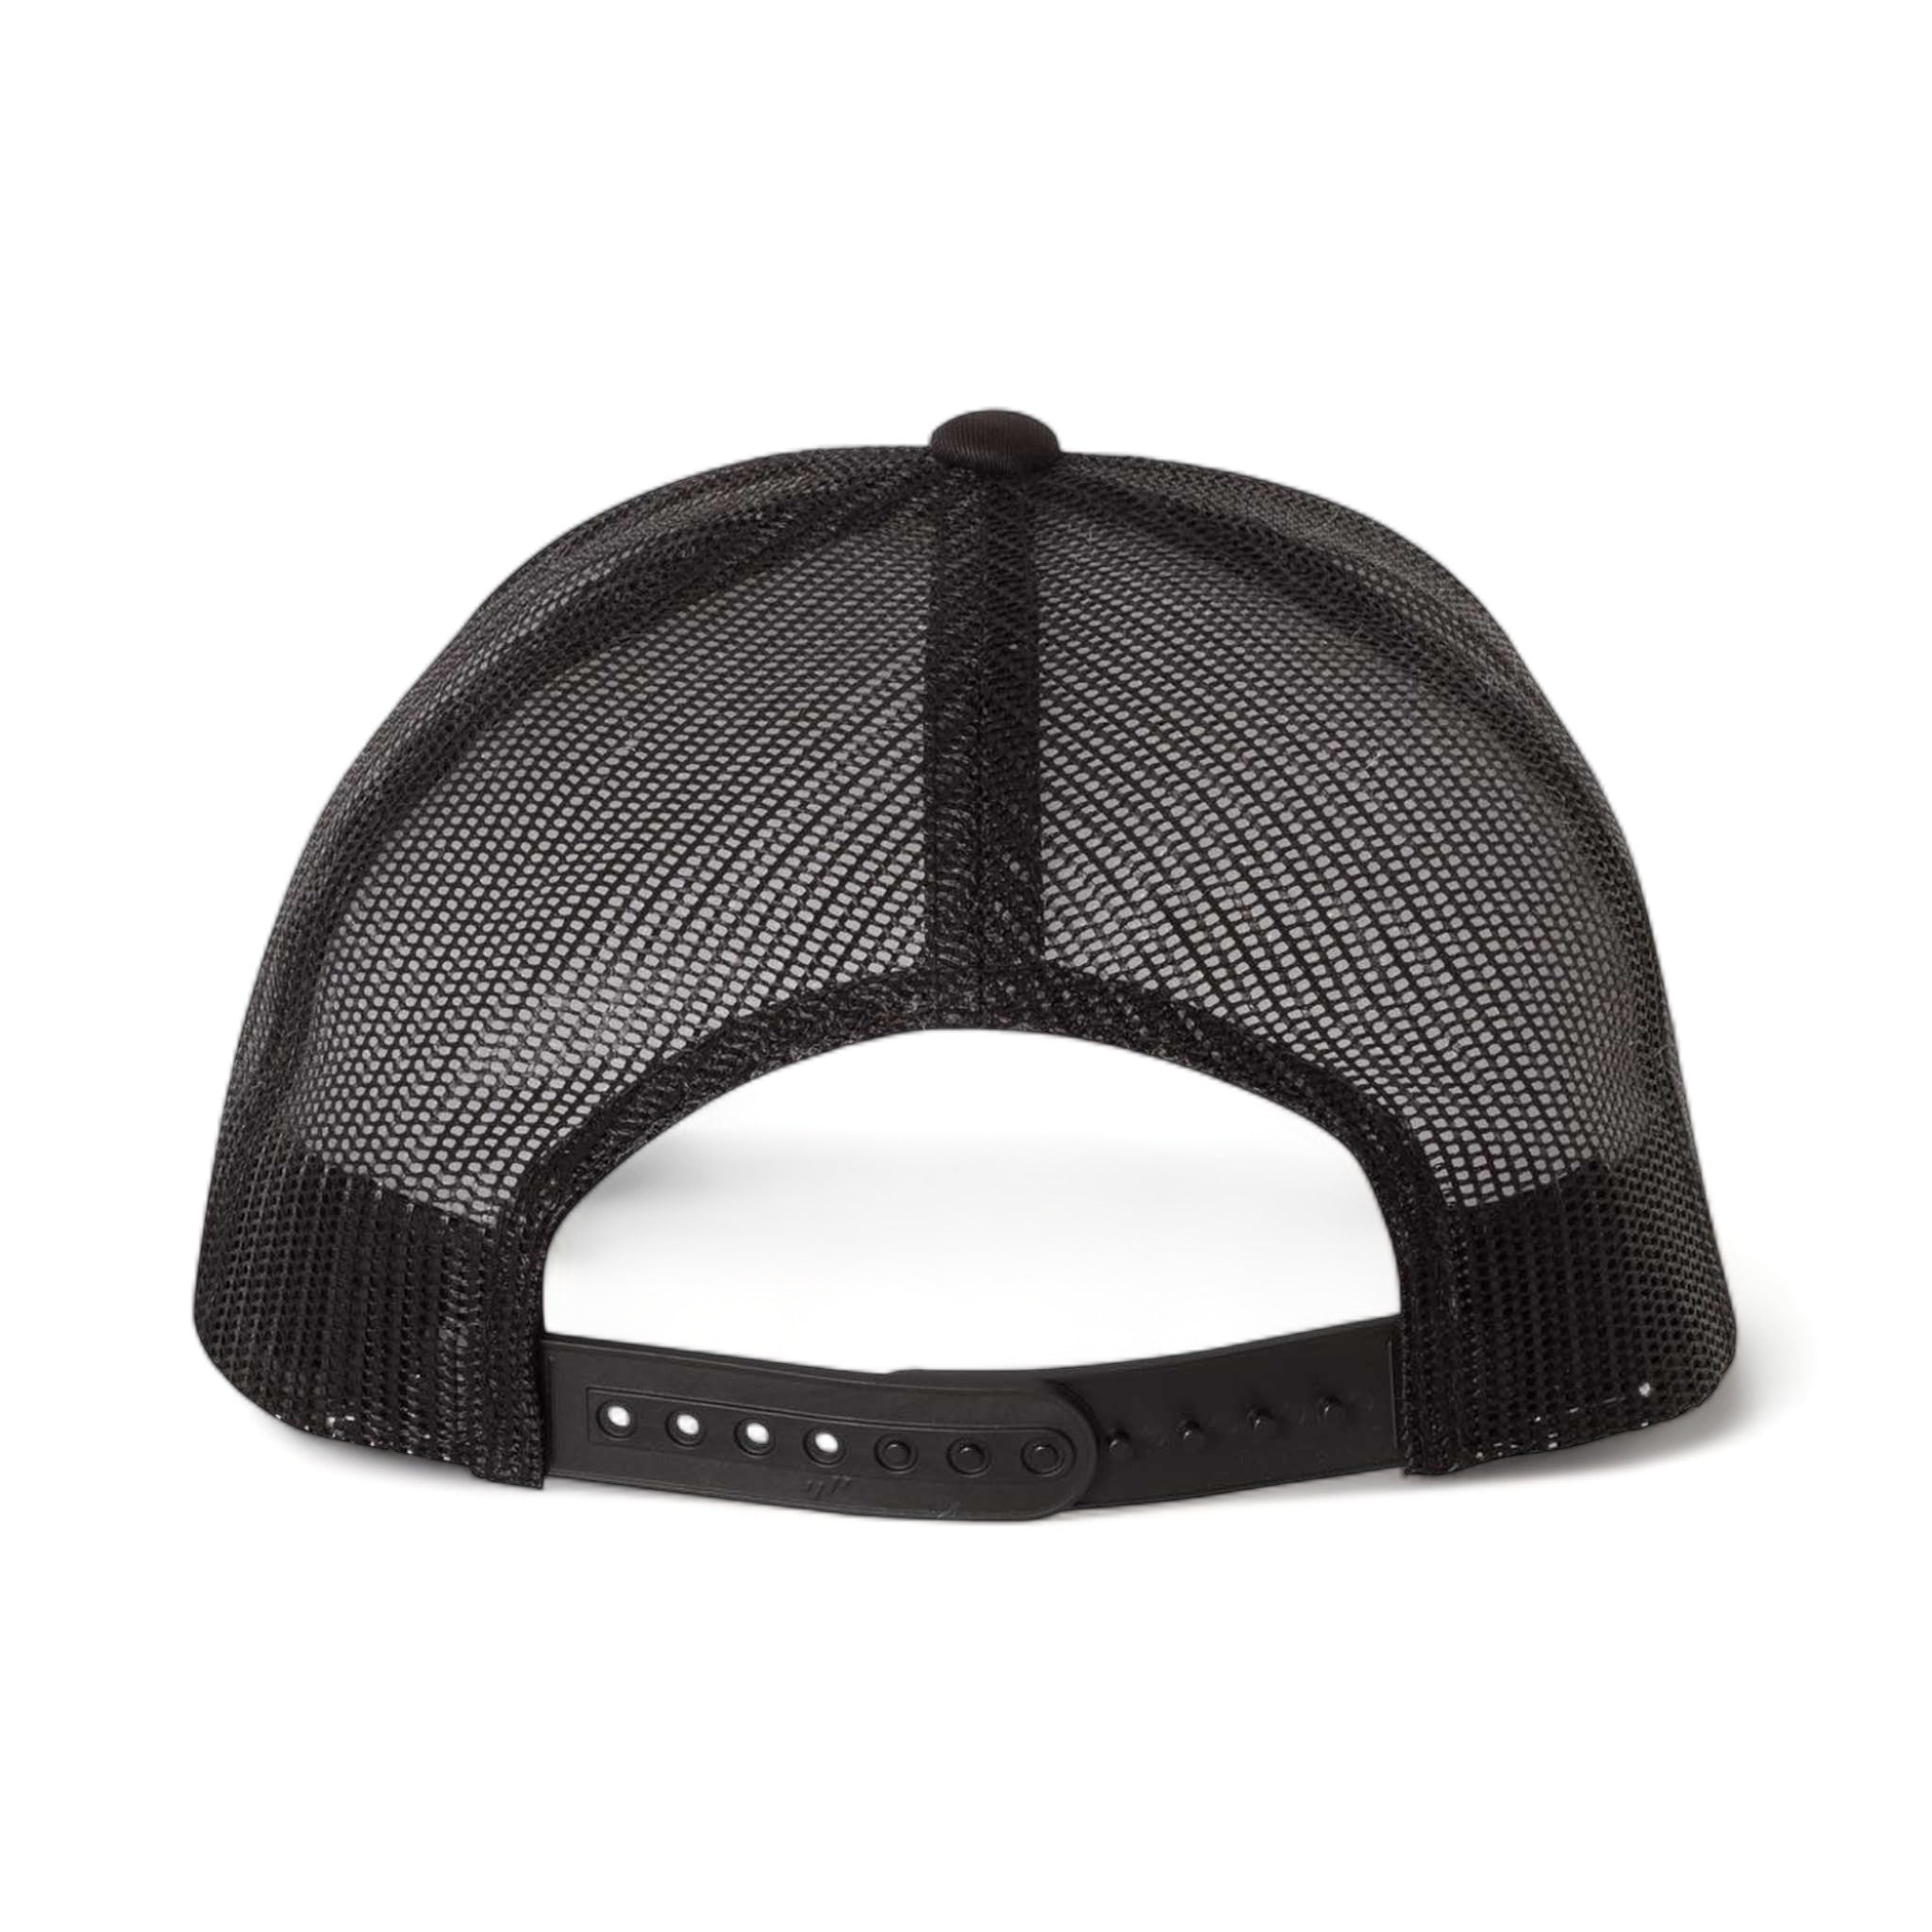 Back view of YP Classics 6606 custom hat in black, white and black